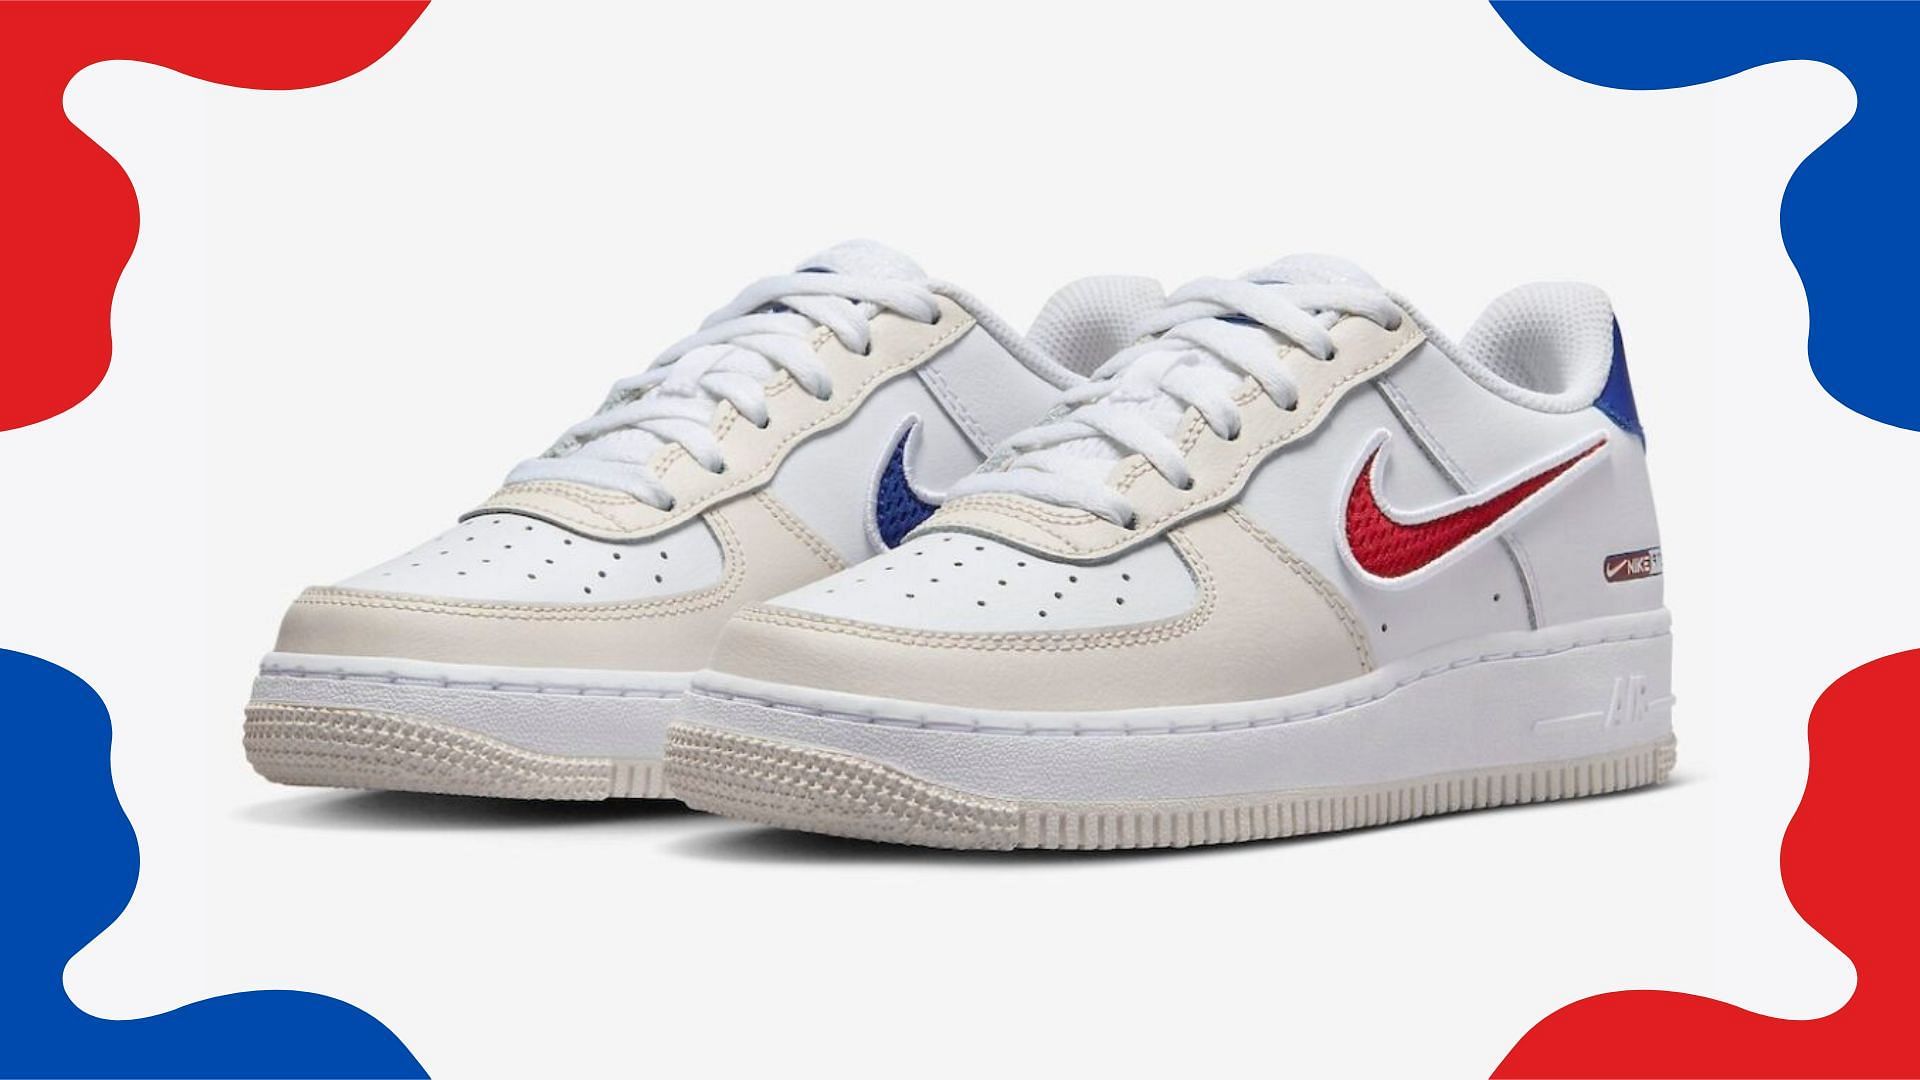 Nike Air Force 1 Low 1972 shoes (Image via YouTube/@sneakerssociety)